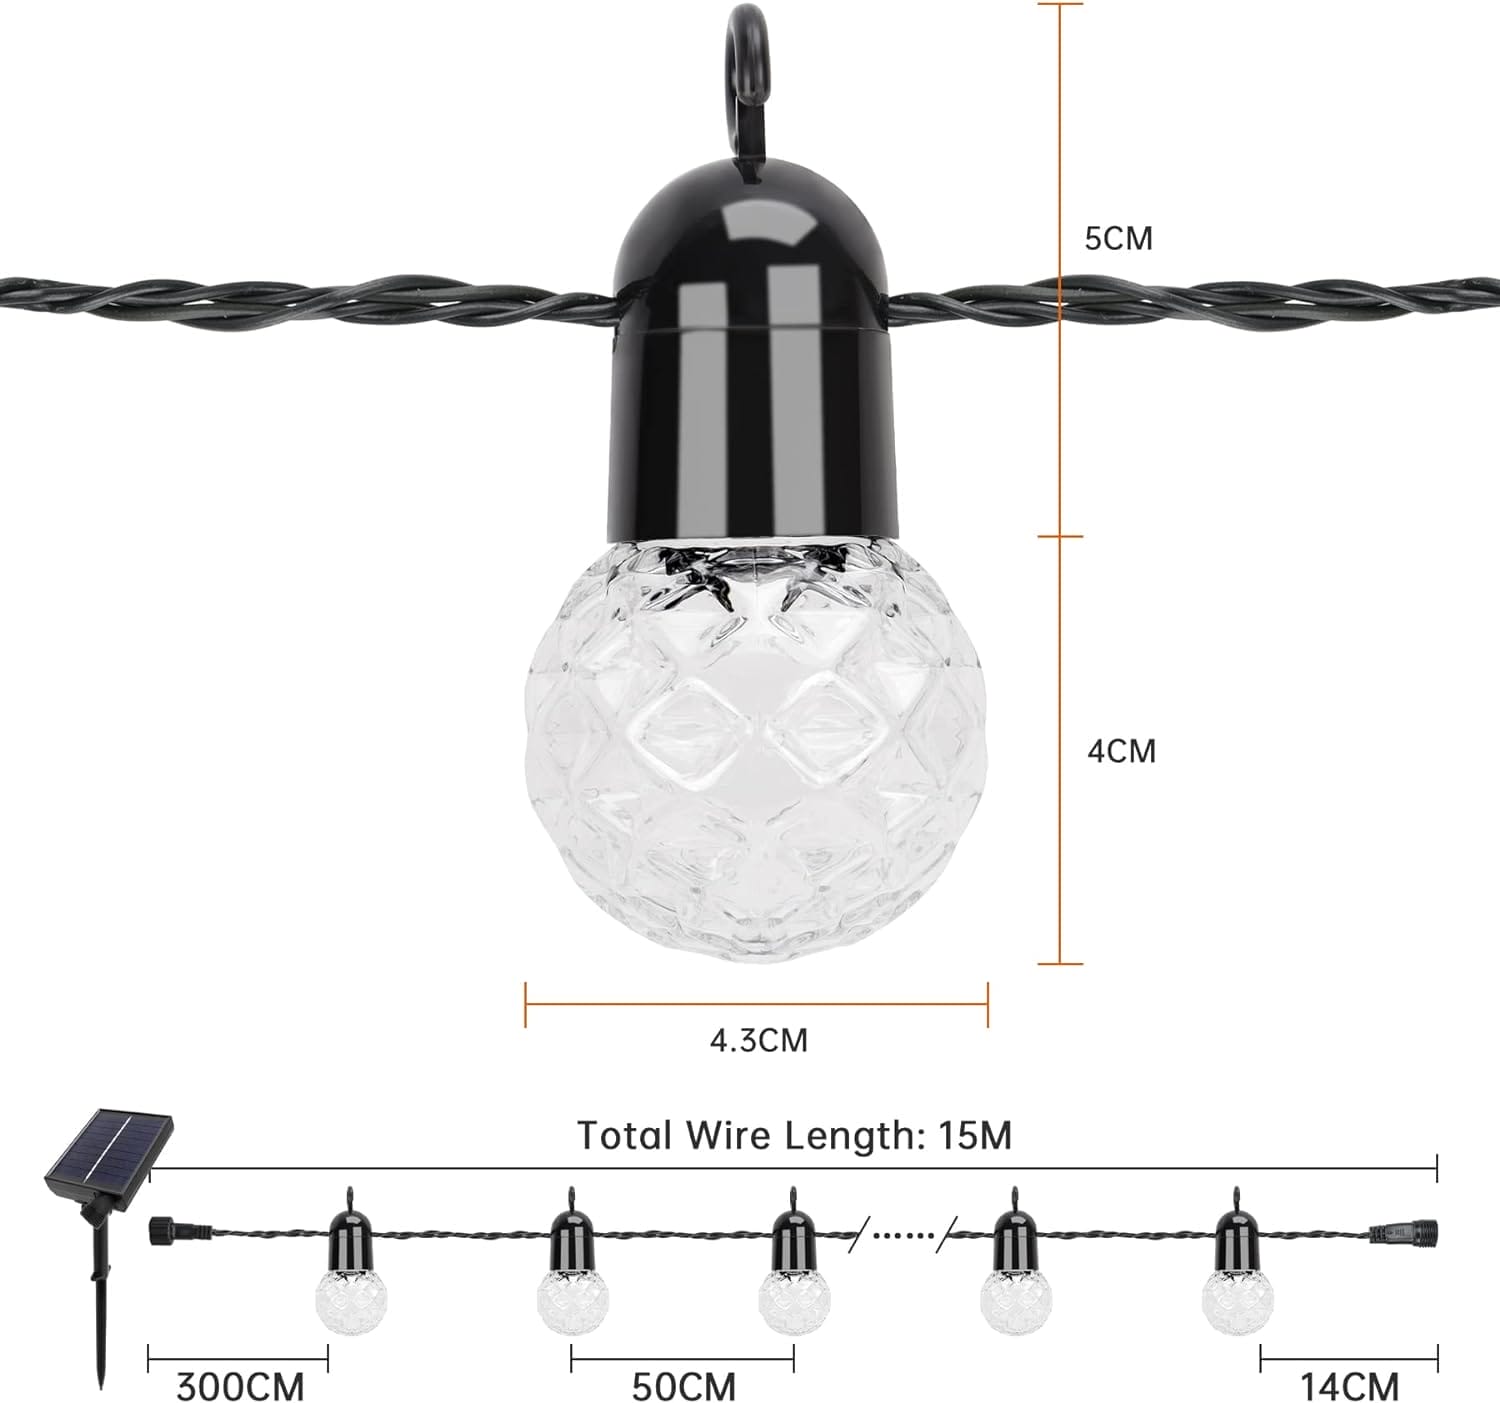 Image shows the measurements of each light.